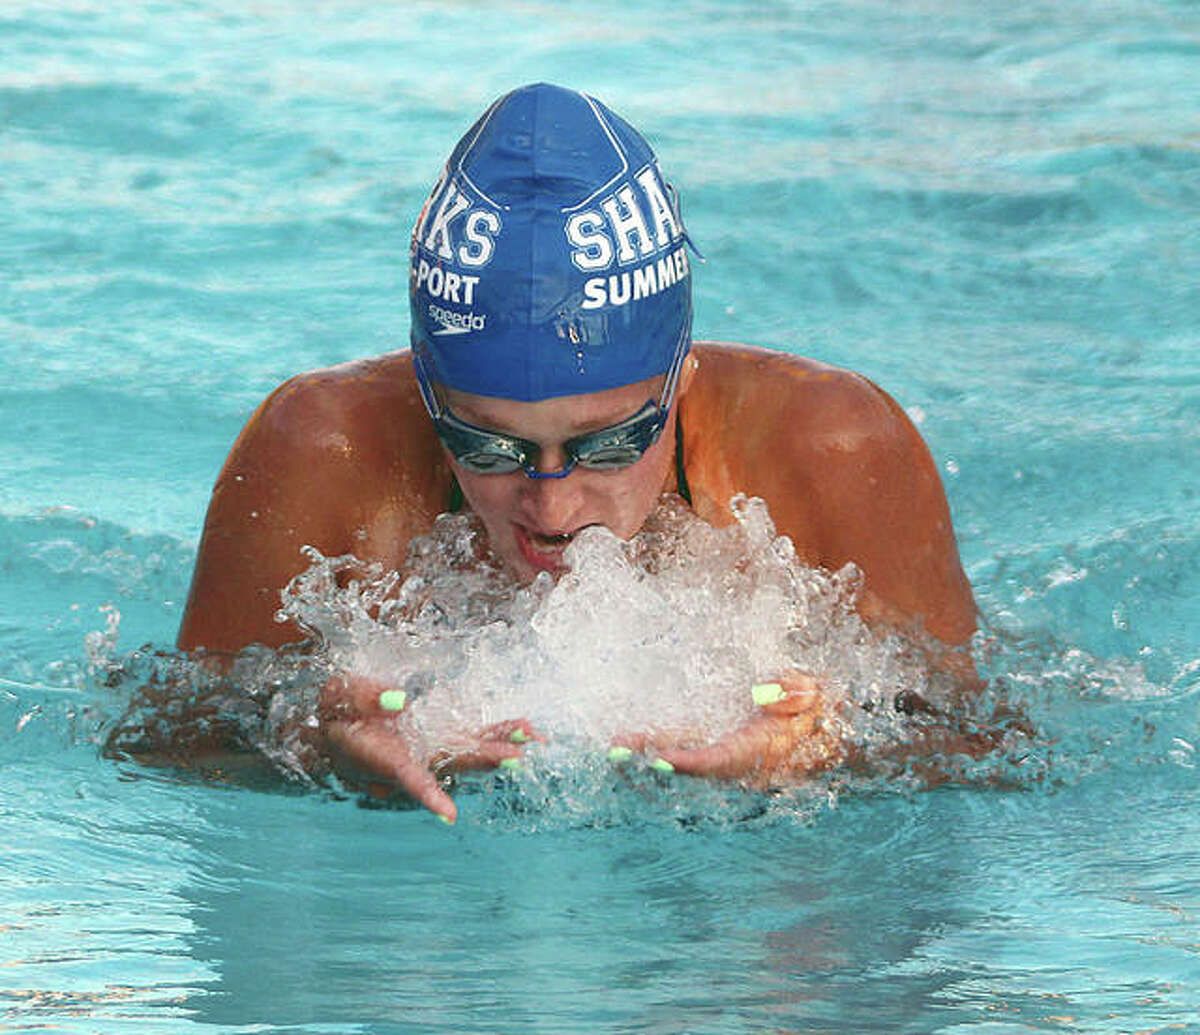 Summers Port’s Anna Moehn heads for the wall in the 15-18 girls breaststroke relay at the 2021 SWISA Relays.